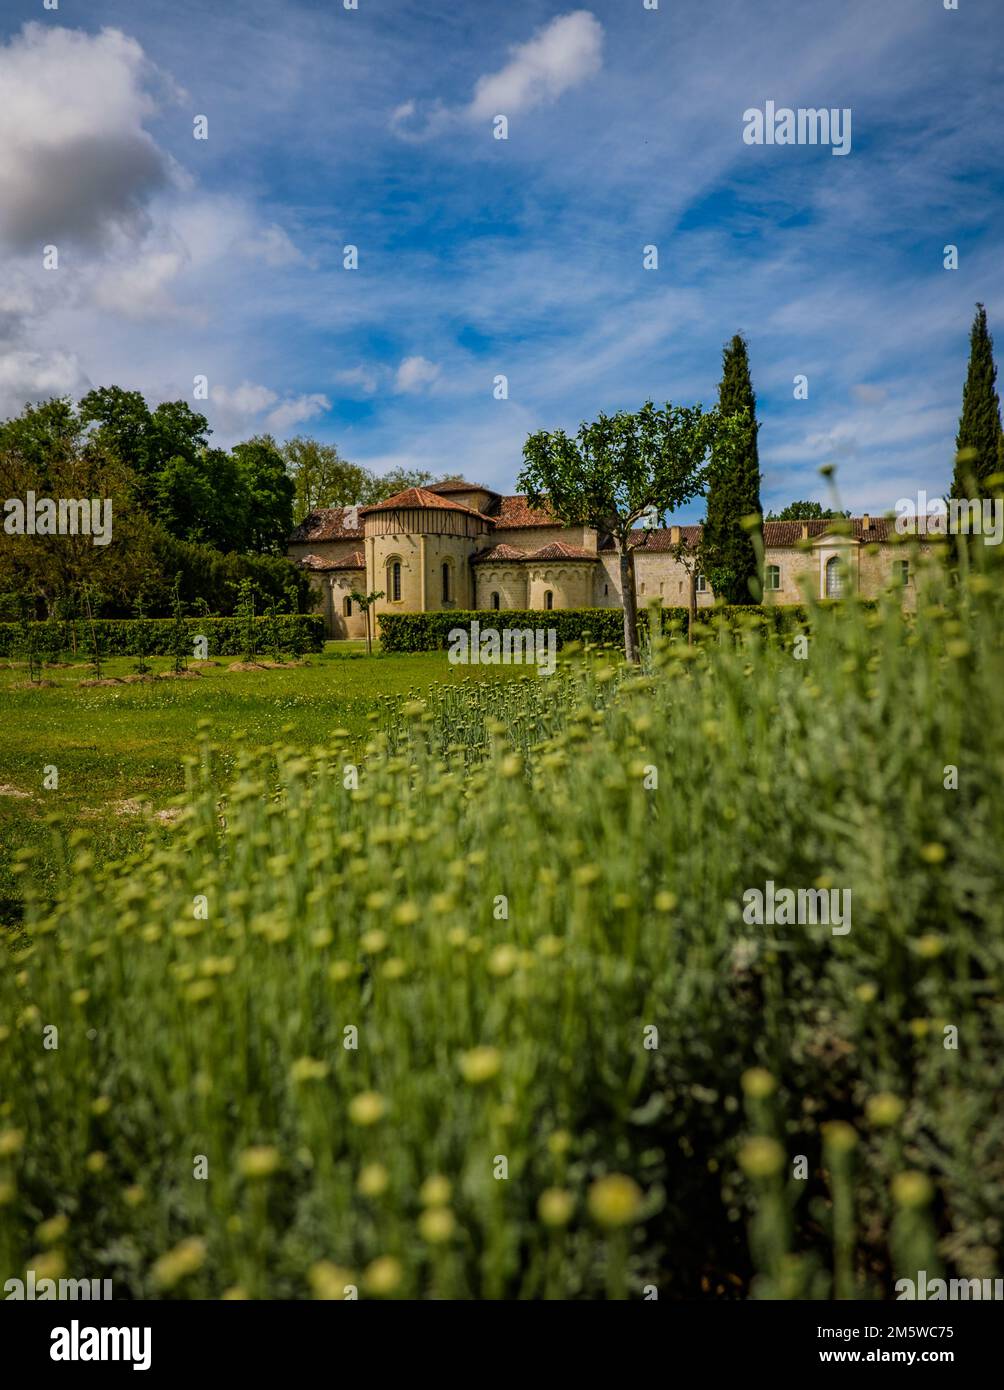 View on the medieval abbey of Flaran in the south of France (Gers) with holy-flax flowers in the foreground Stock Photo